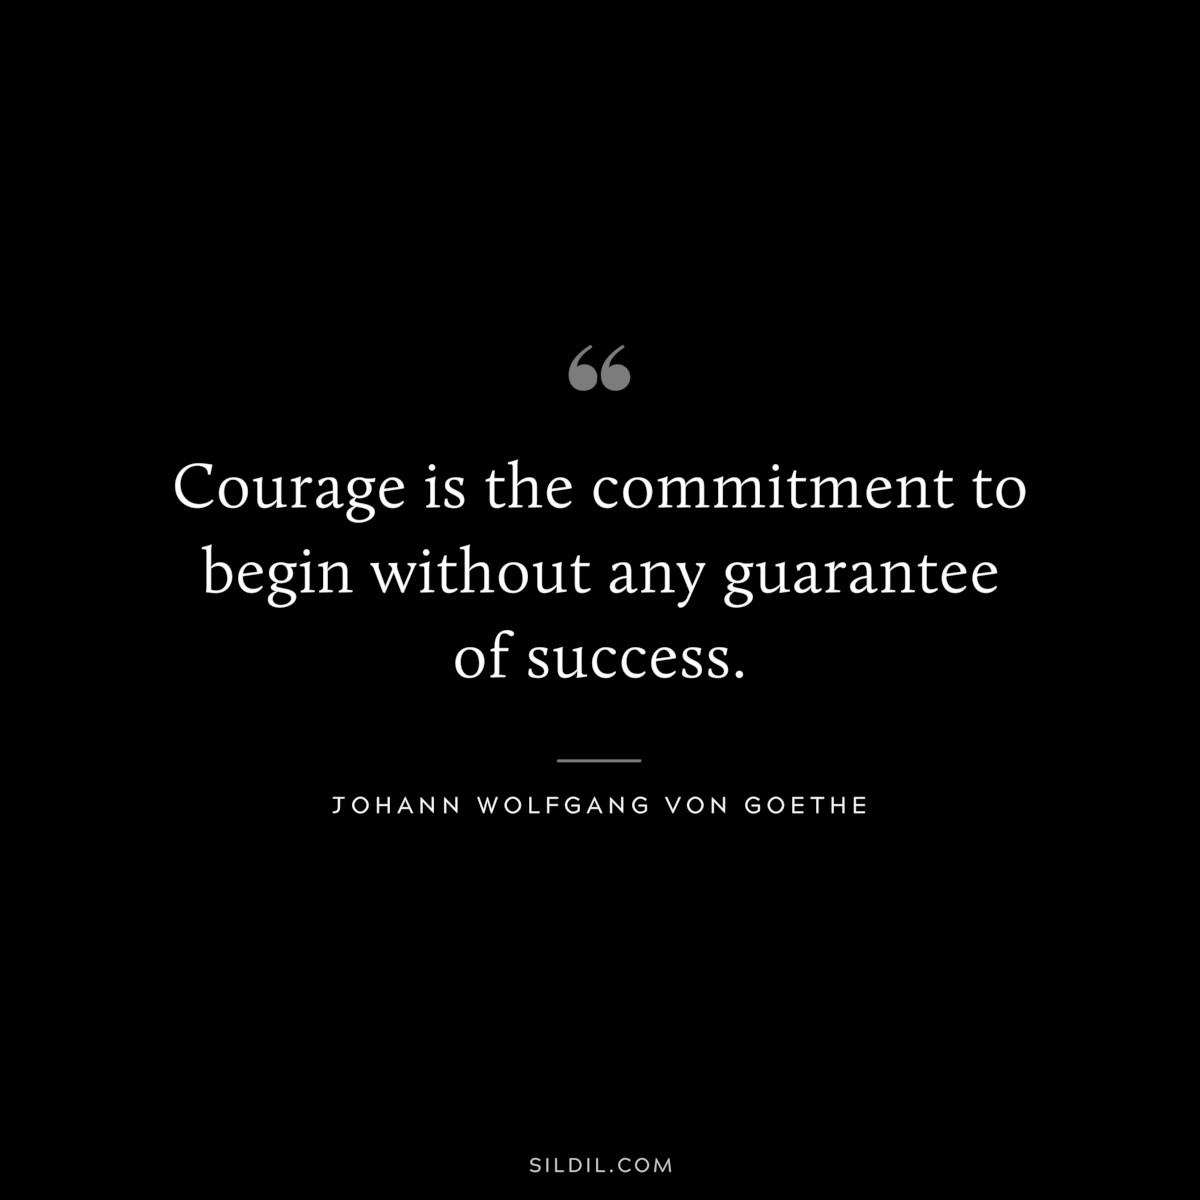 Courage is the commitment to begin without any guarantee of success.― Johann Wolfgang von Goethe